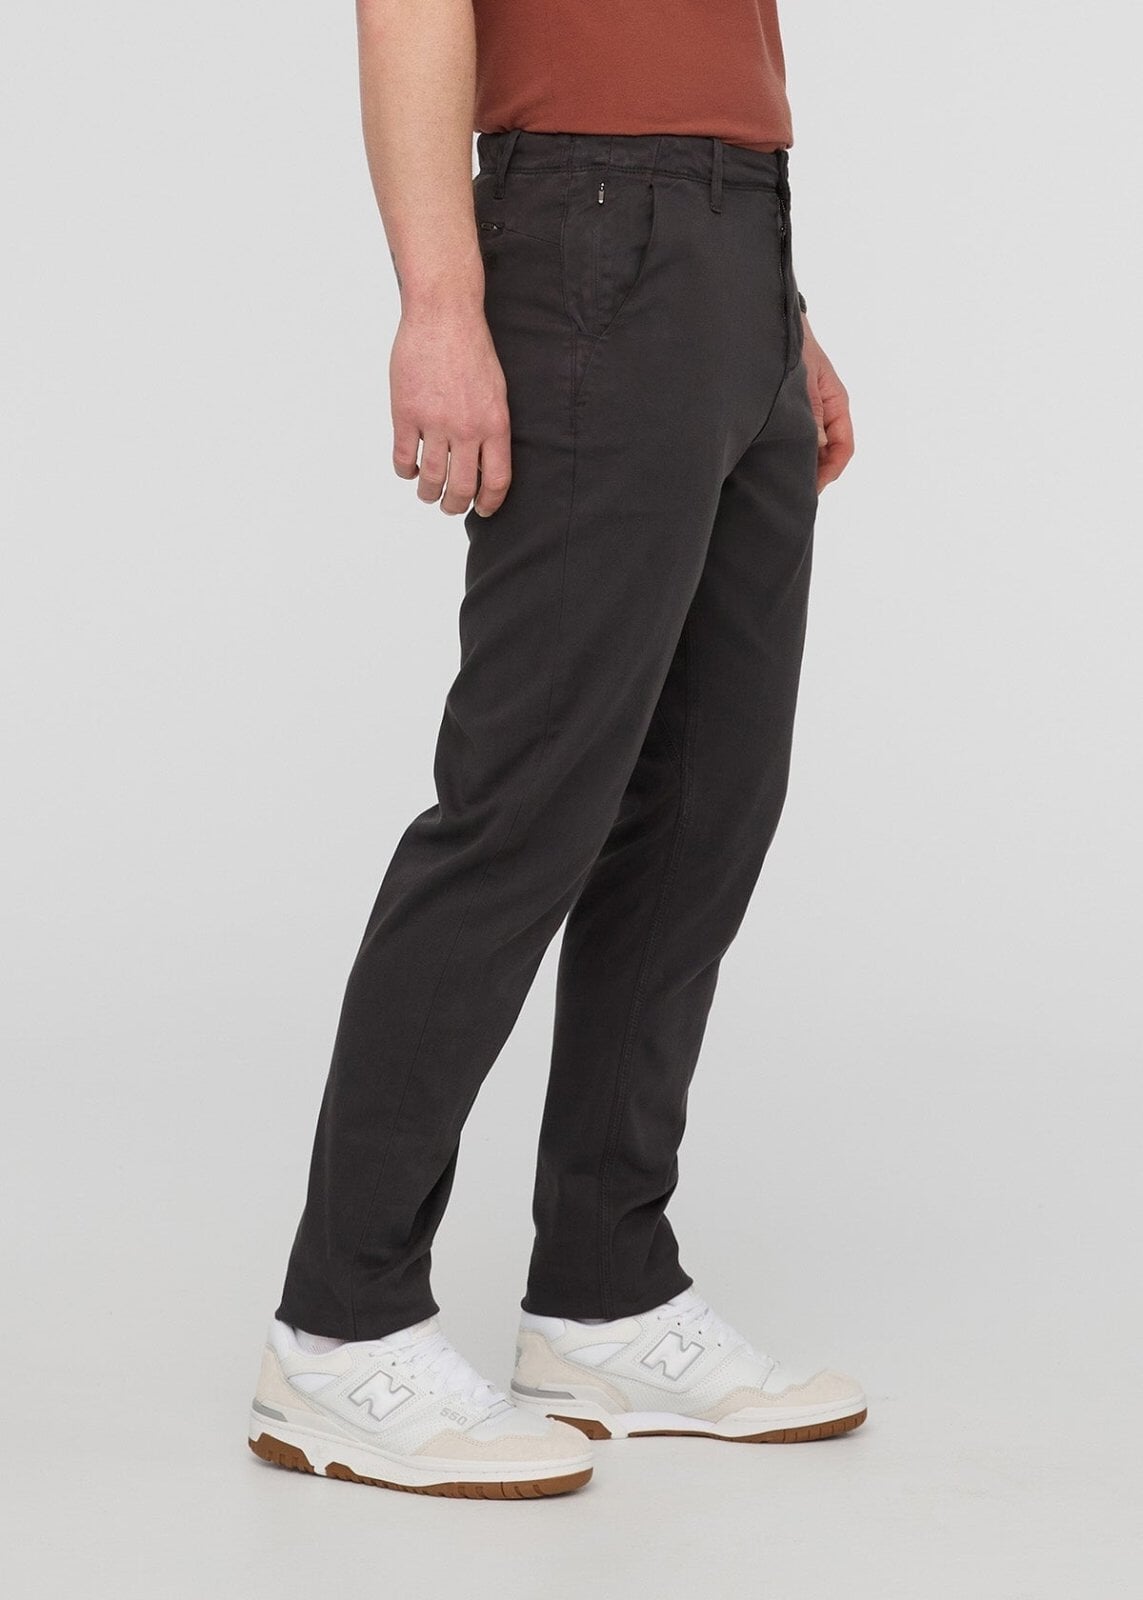 Mens Black Formal Plain Cotton Pant at Rs.550/Piece in pune offer by Metro  Corporation